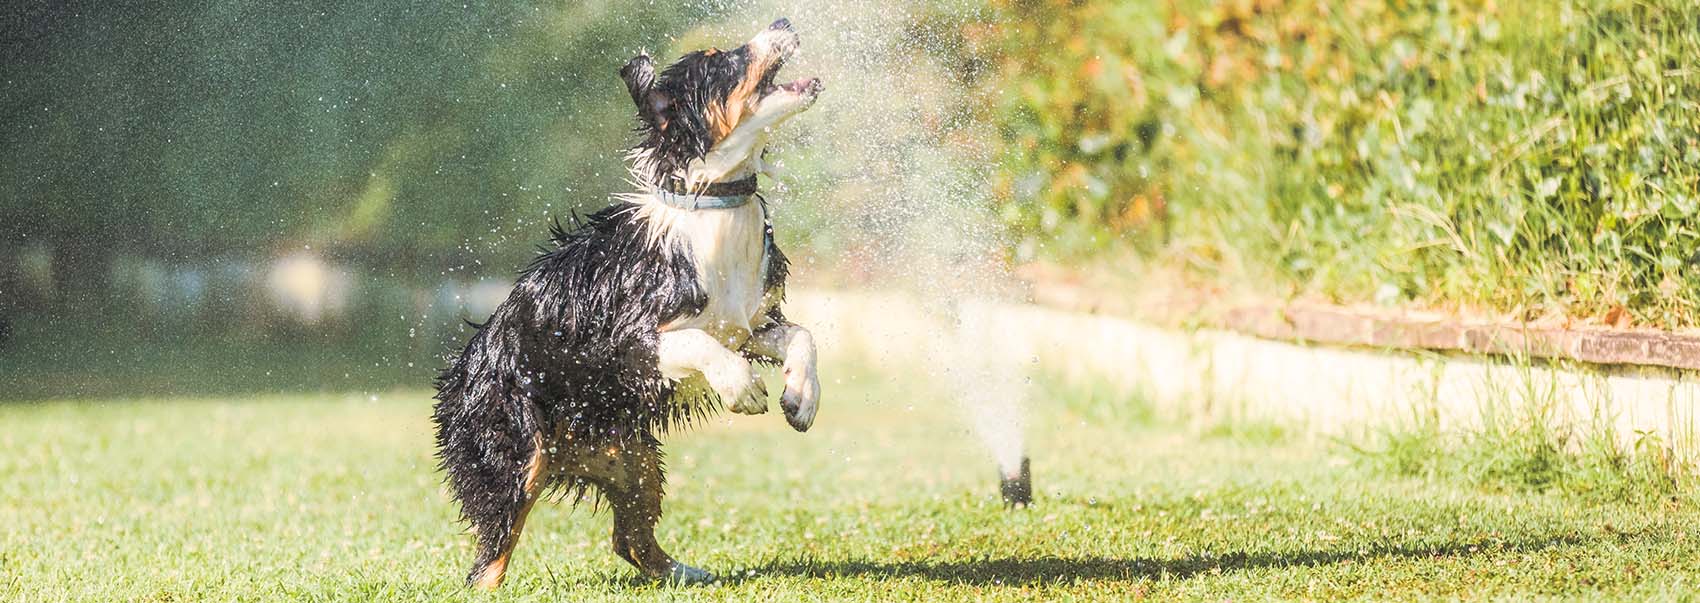 Australian shepherd puppy playing with a lawn sprinkler